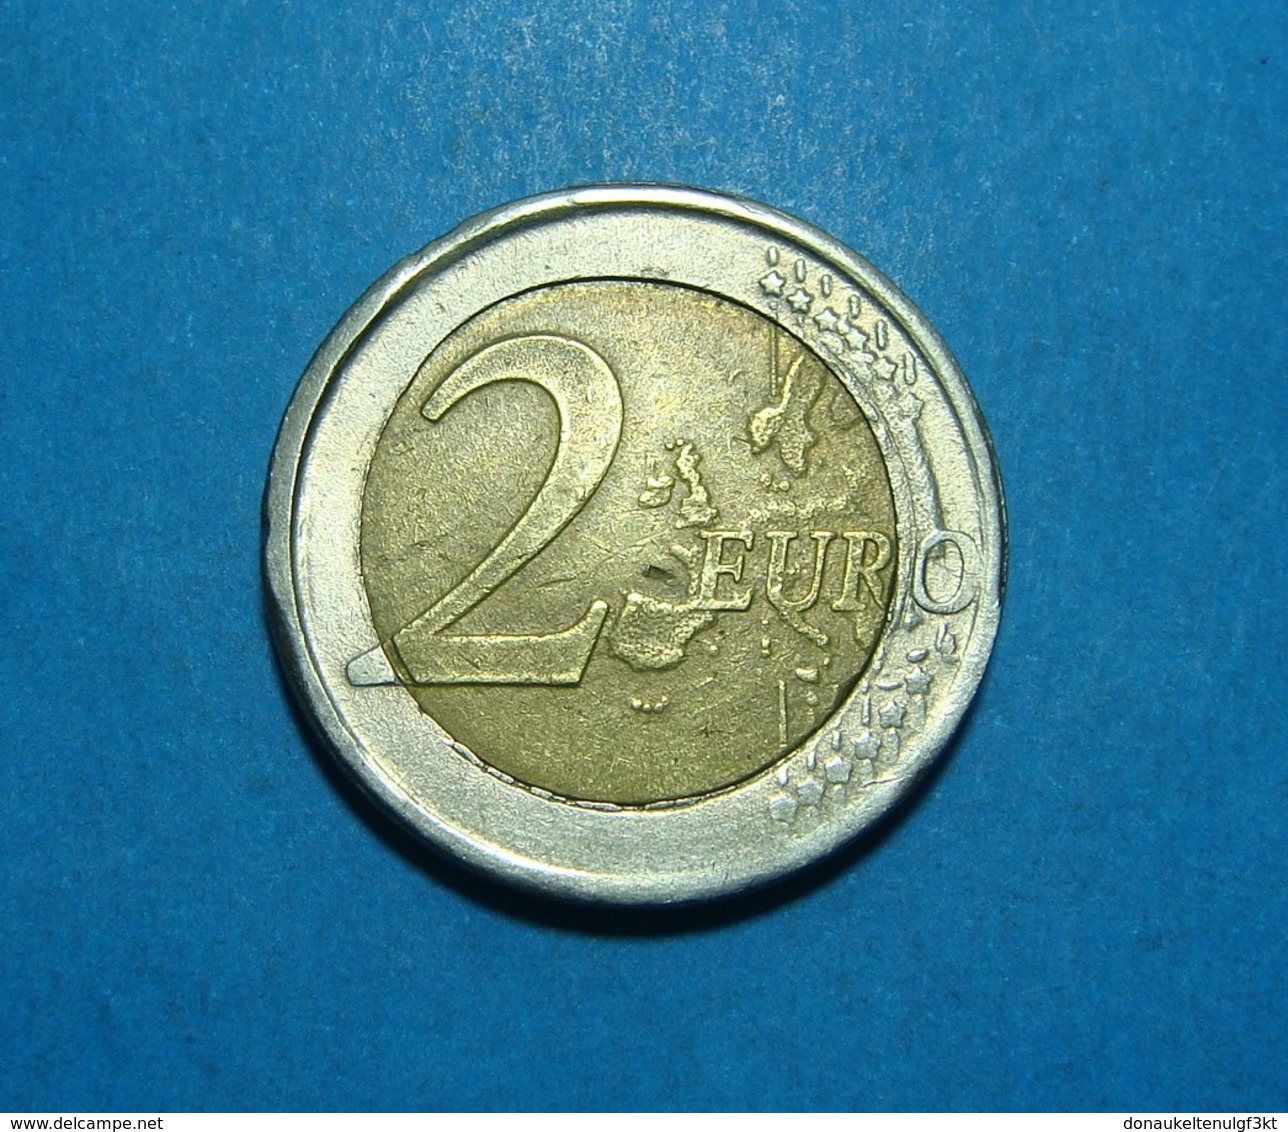 GERMANY 2 Euro 2018, FORGERY, FAKE, DIFFERENT METAL, EDGES UNCLEAR, VERY RARE - Errors And Oddities